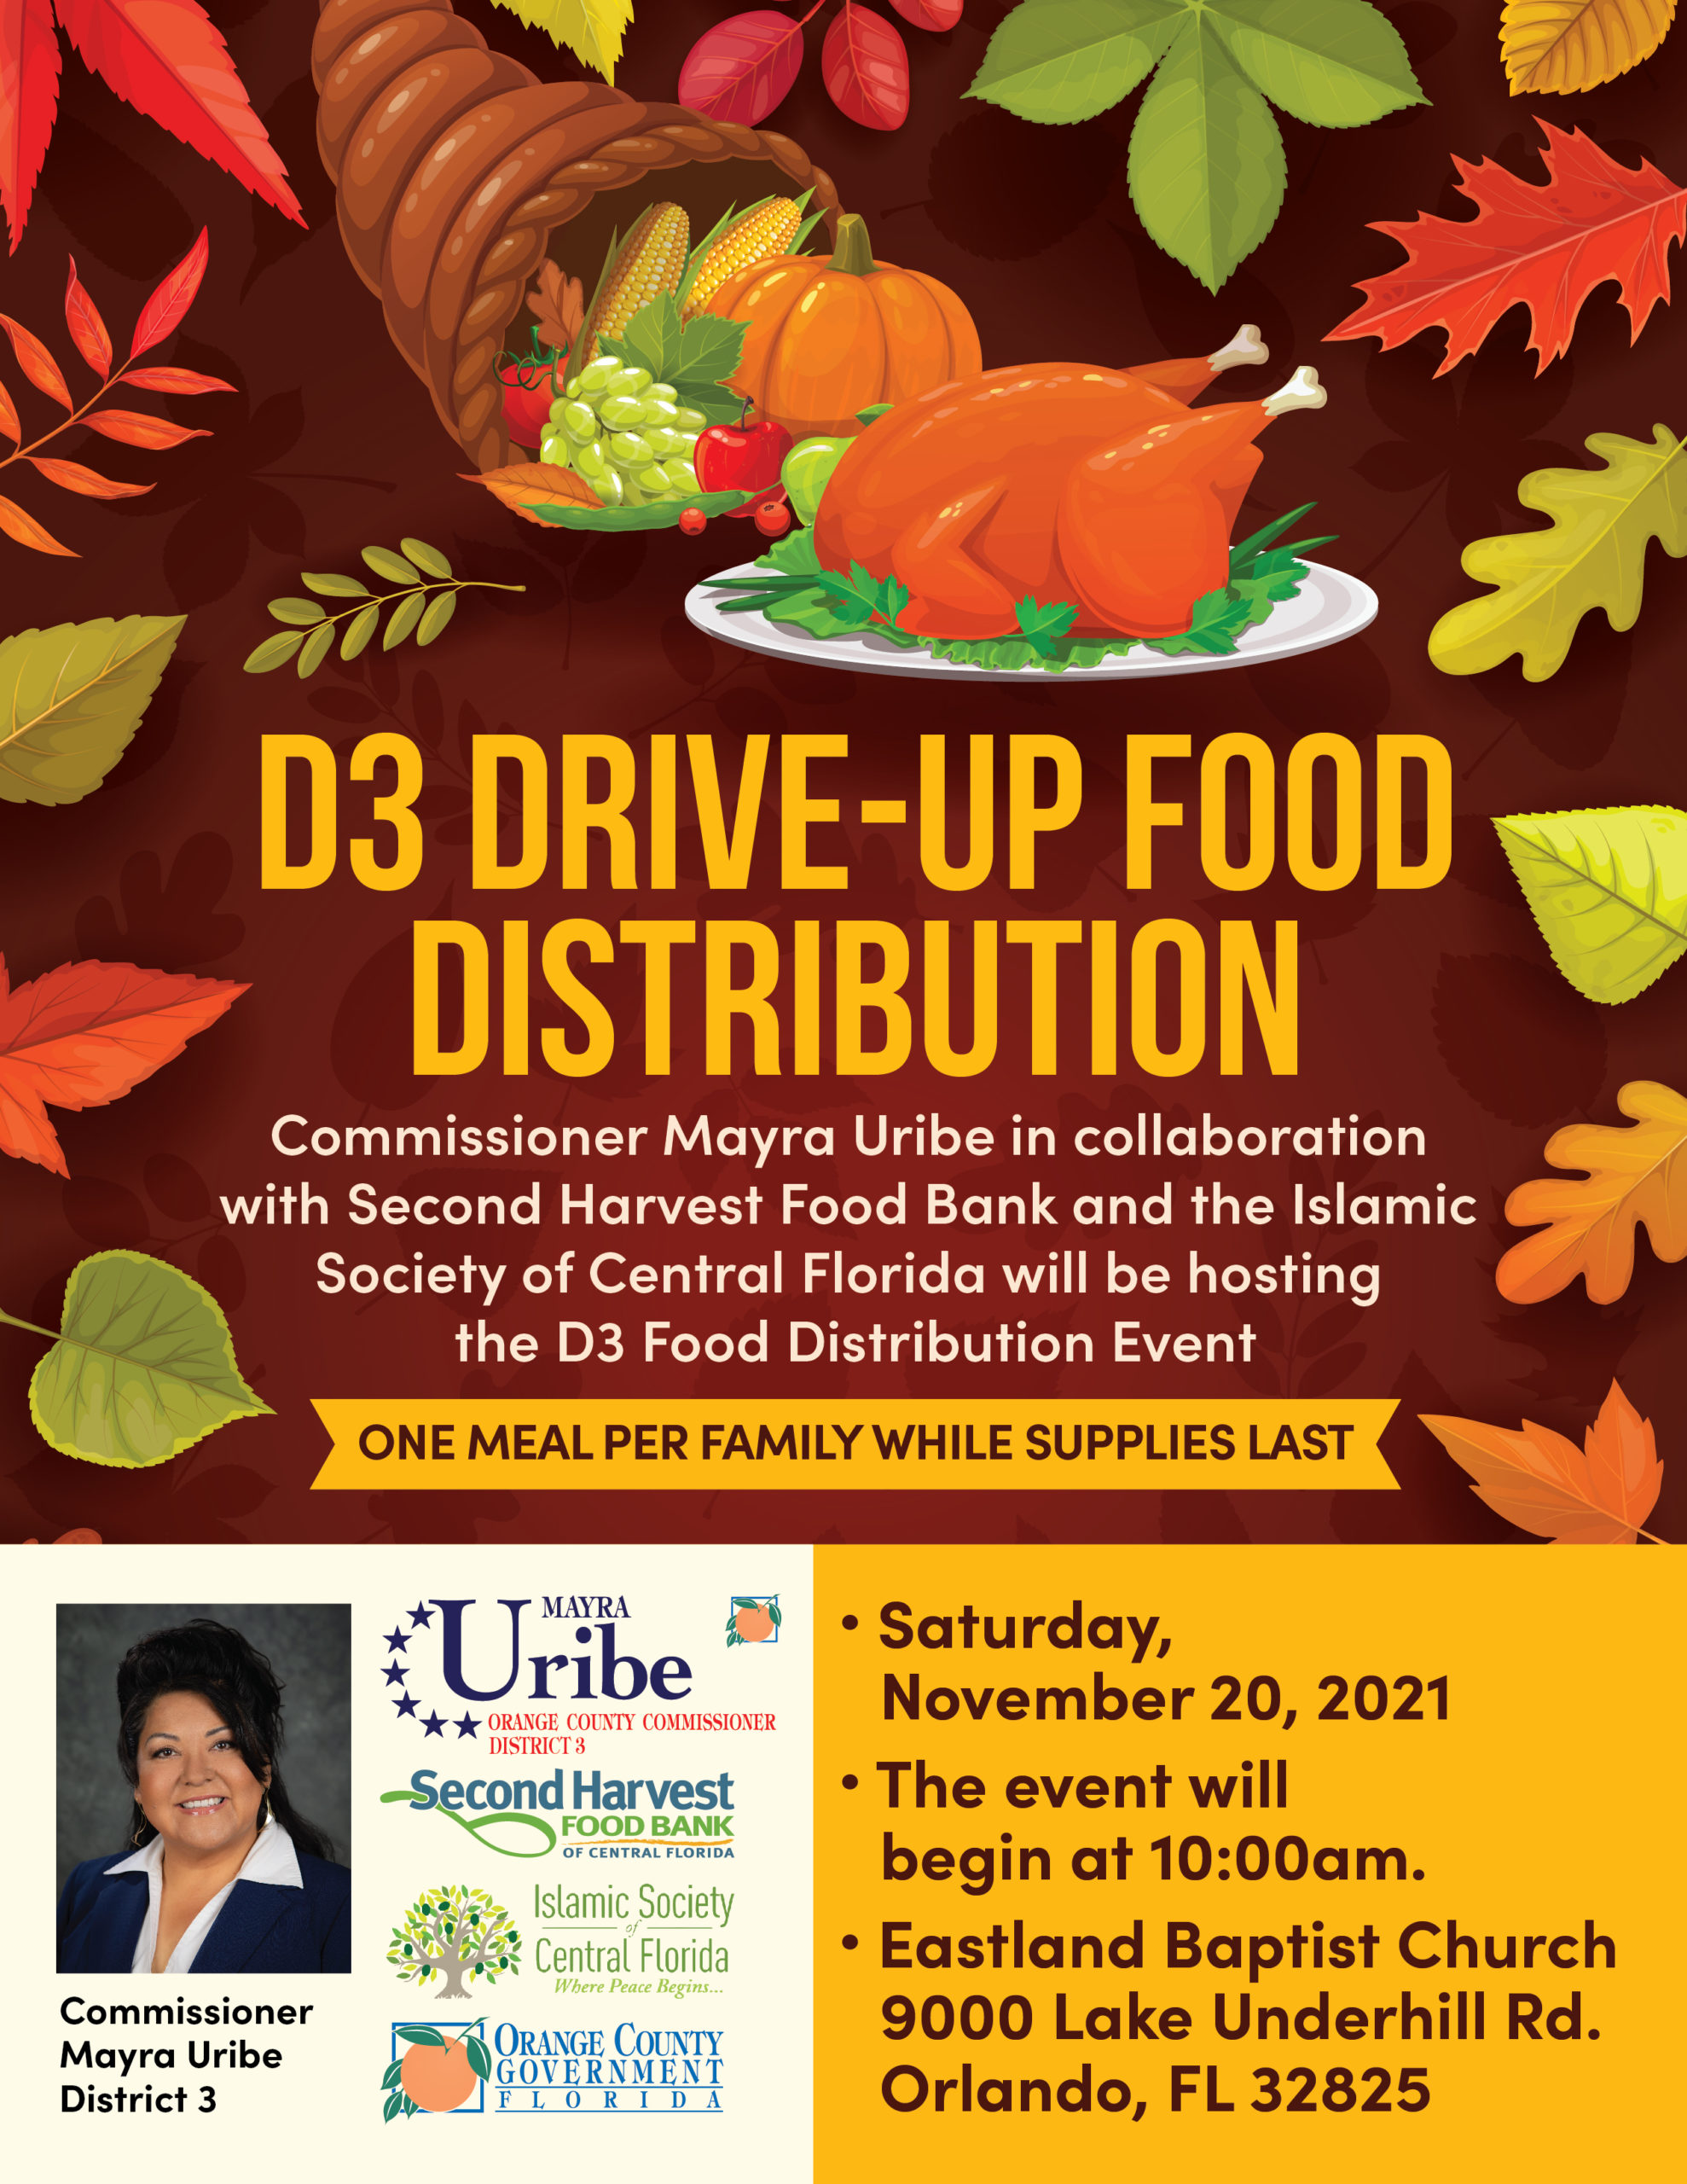 District 3 Drive-up Food Distribution - One meal per family while supplies last